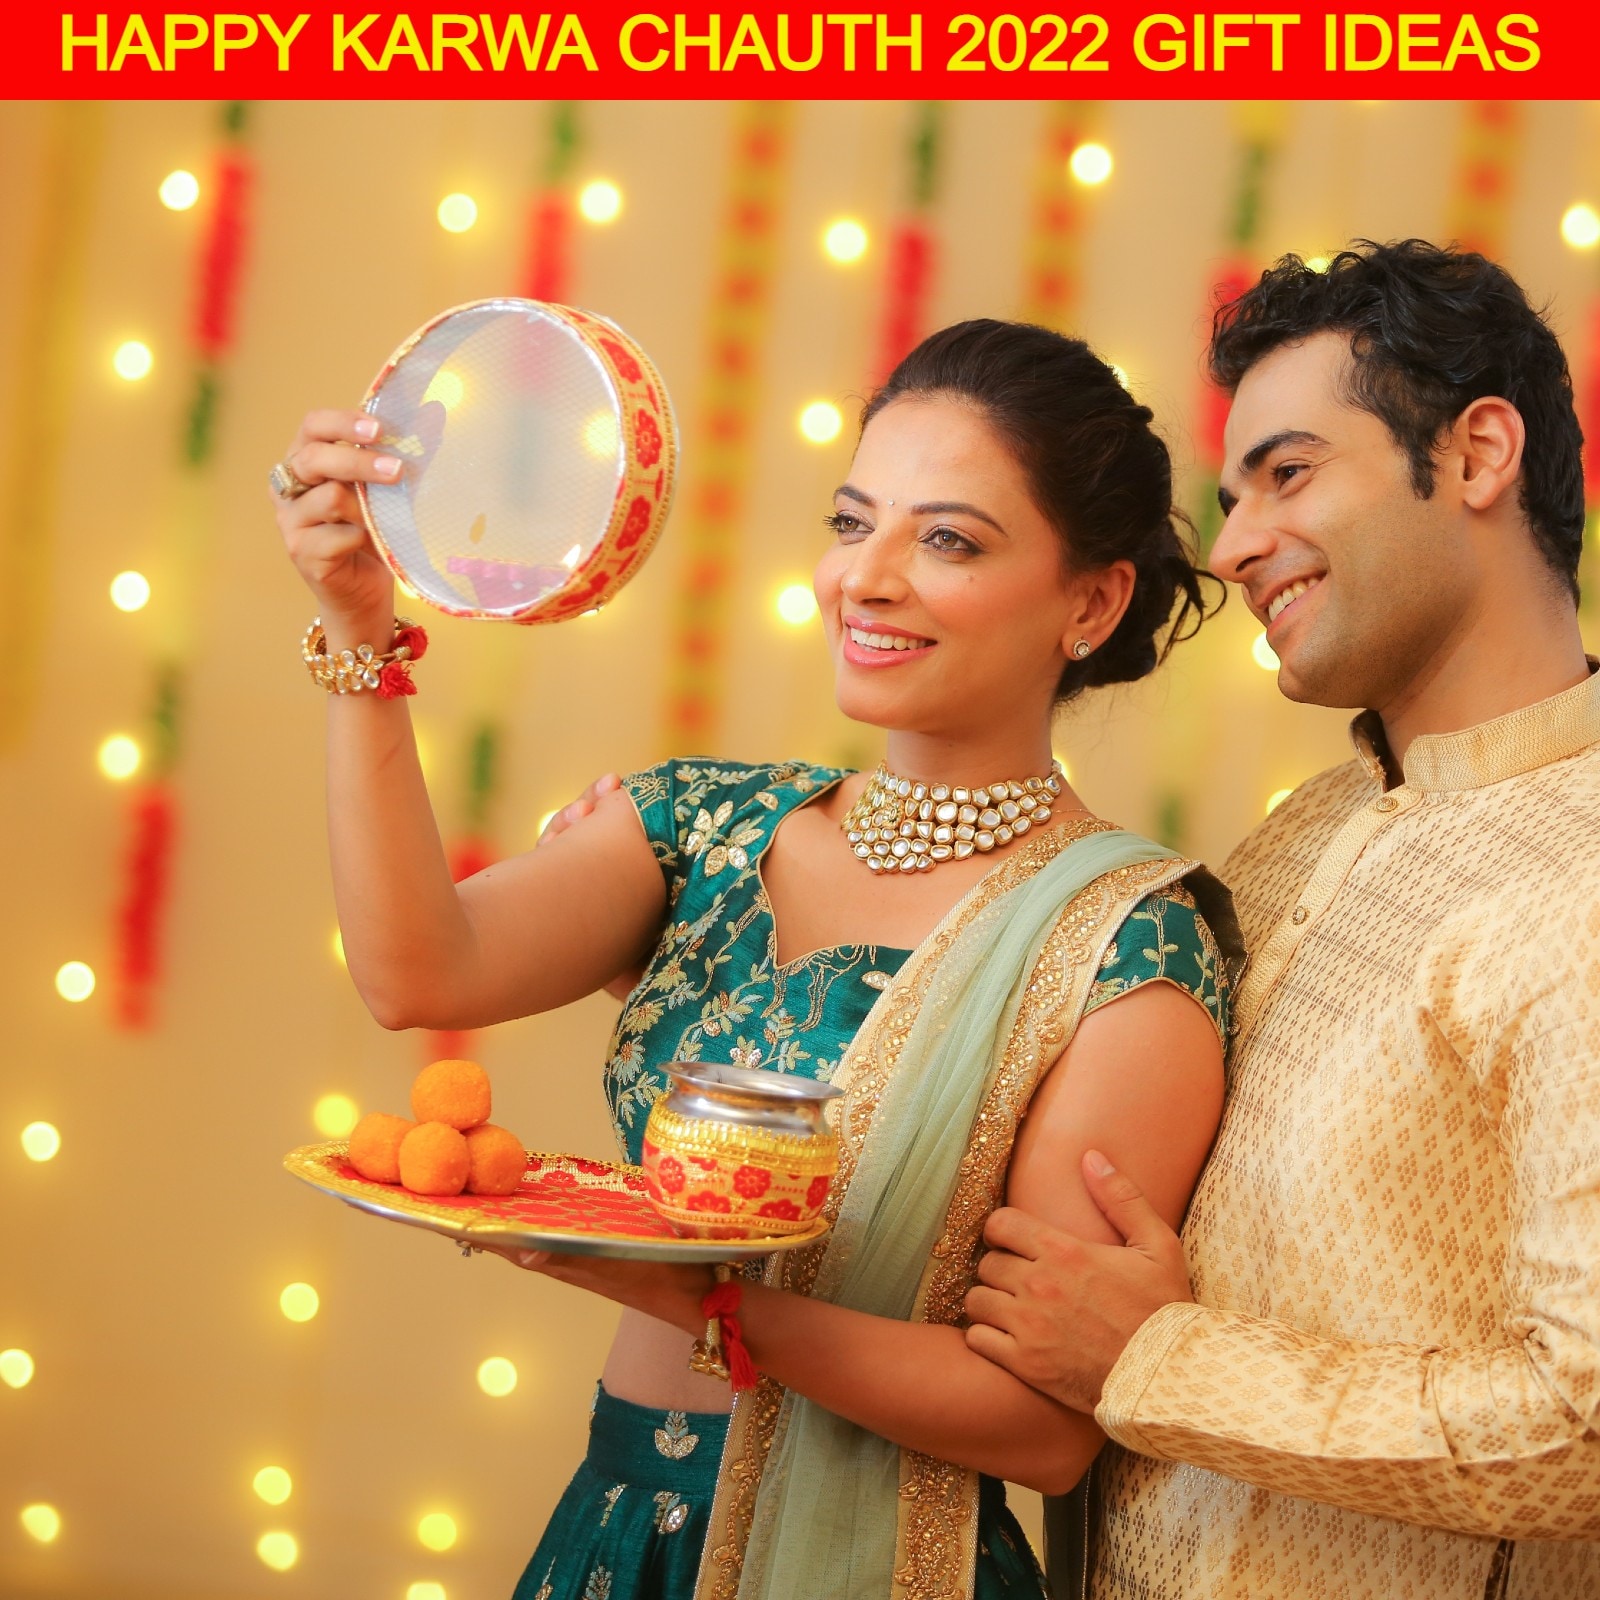 Karva Chauth Pooja Thali Set for Wife, Daughter-in-law, Mother-in-law |  Festive gifts, Diwali gifts, Wedding